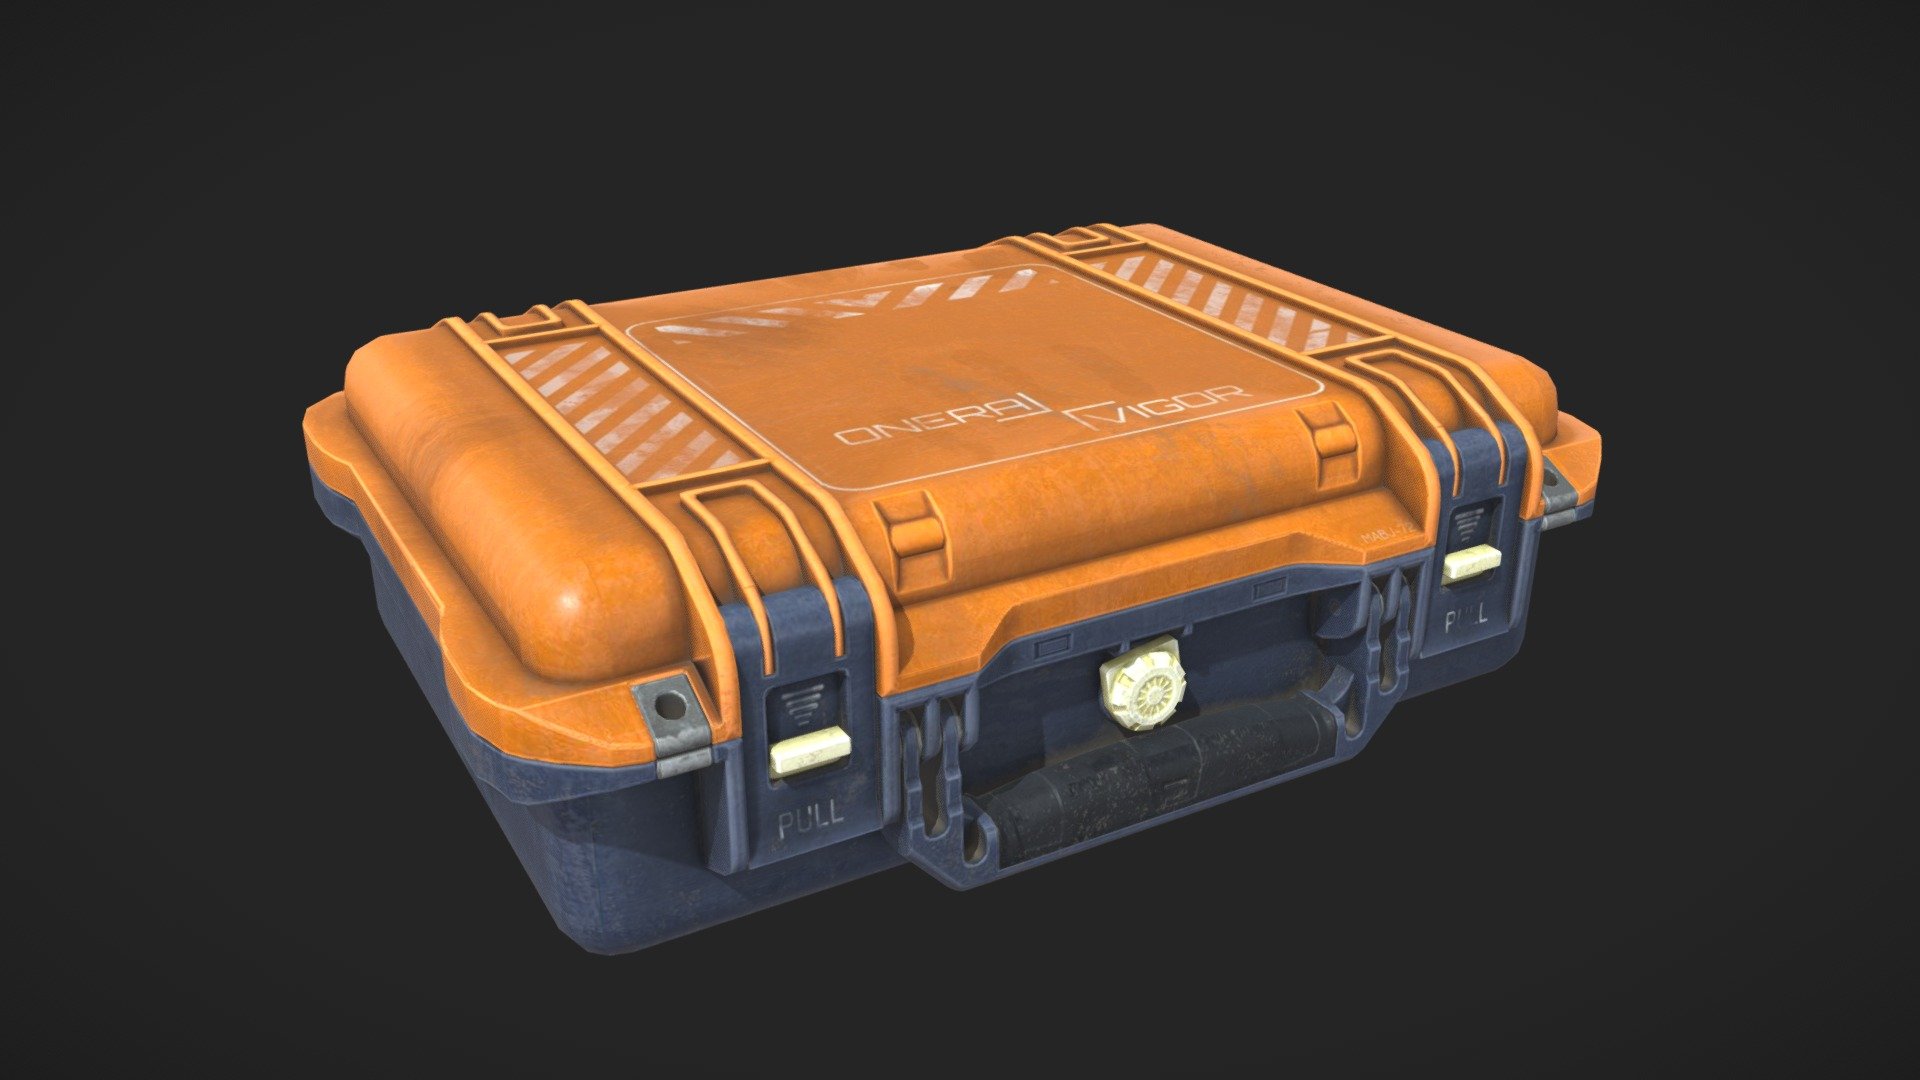 A hardcase that contains vital components for a recently discovered human cloning method at the Onera Vigor medical facility - Onera Vigor Hardcase - 3D model by Perry Wubben (@perry_wubben) 3d model